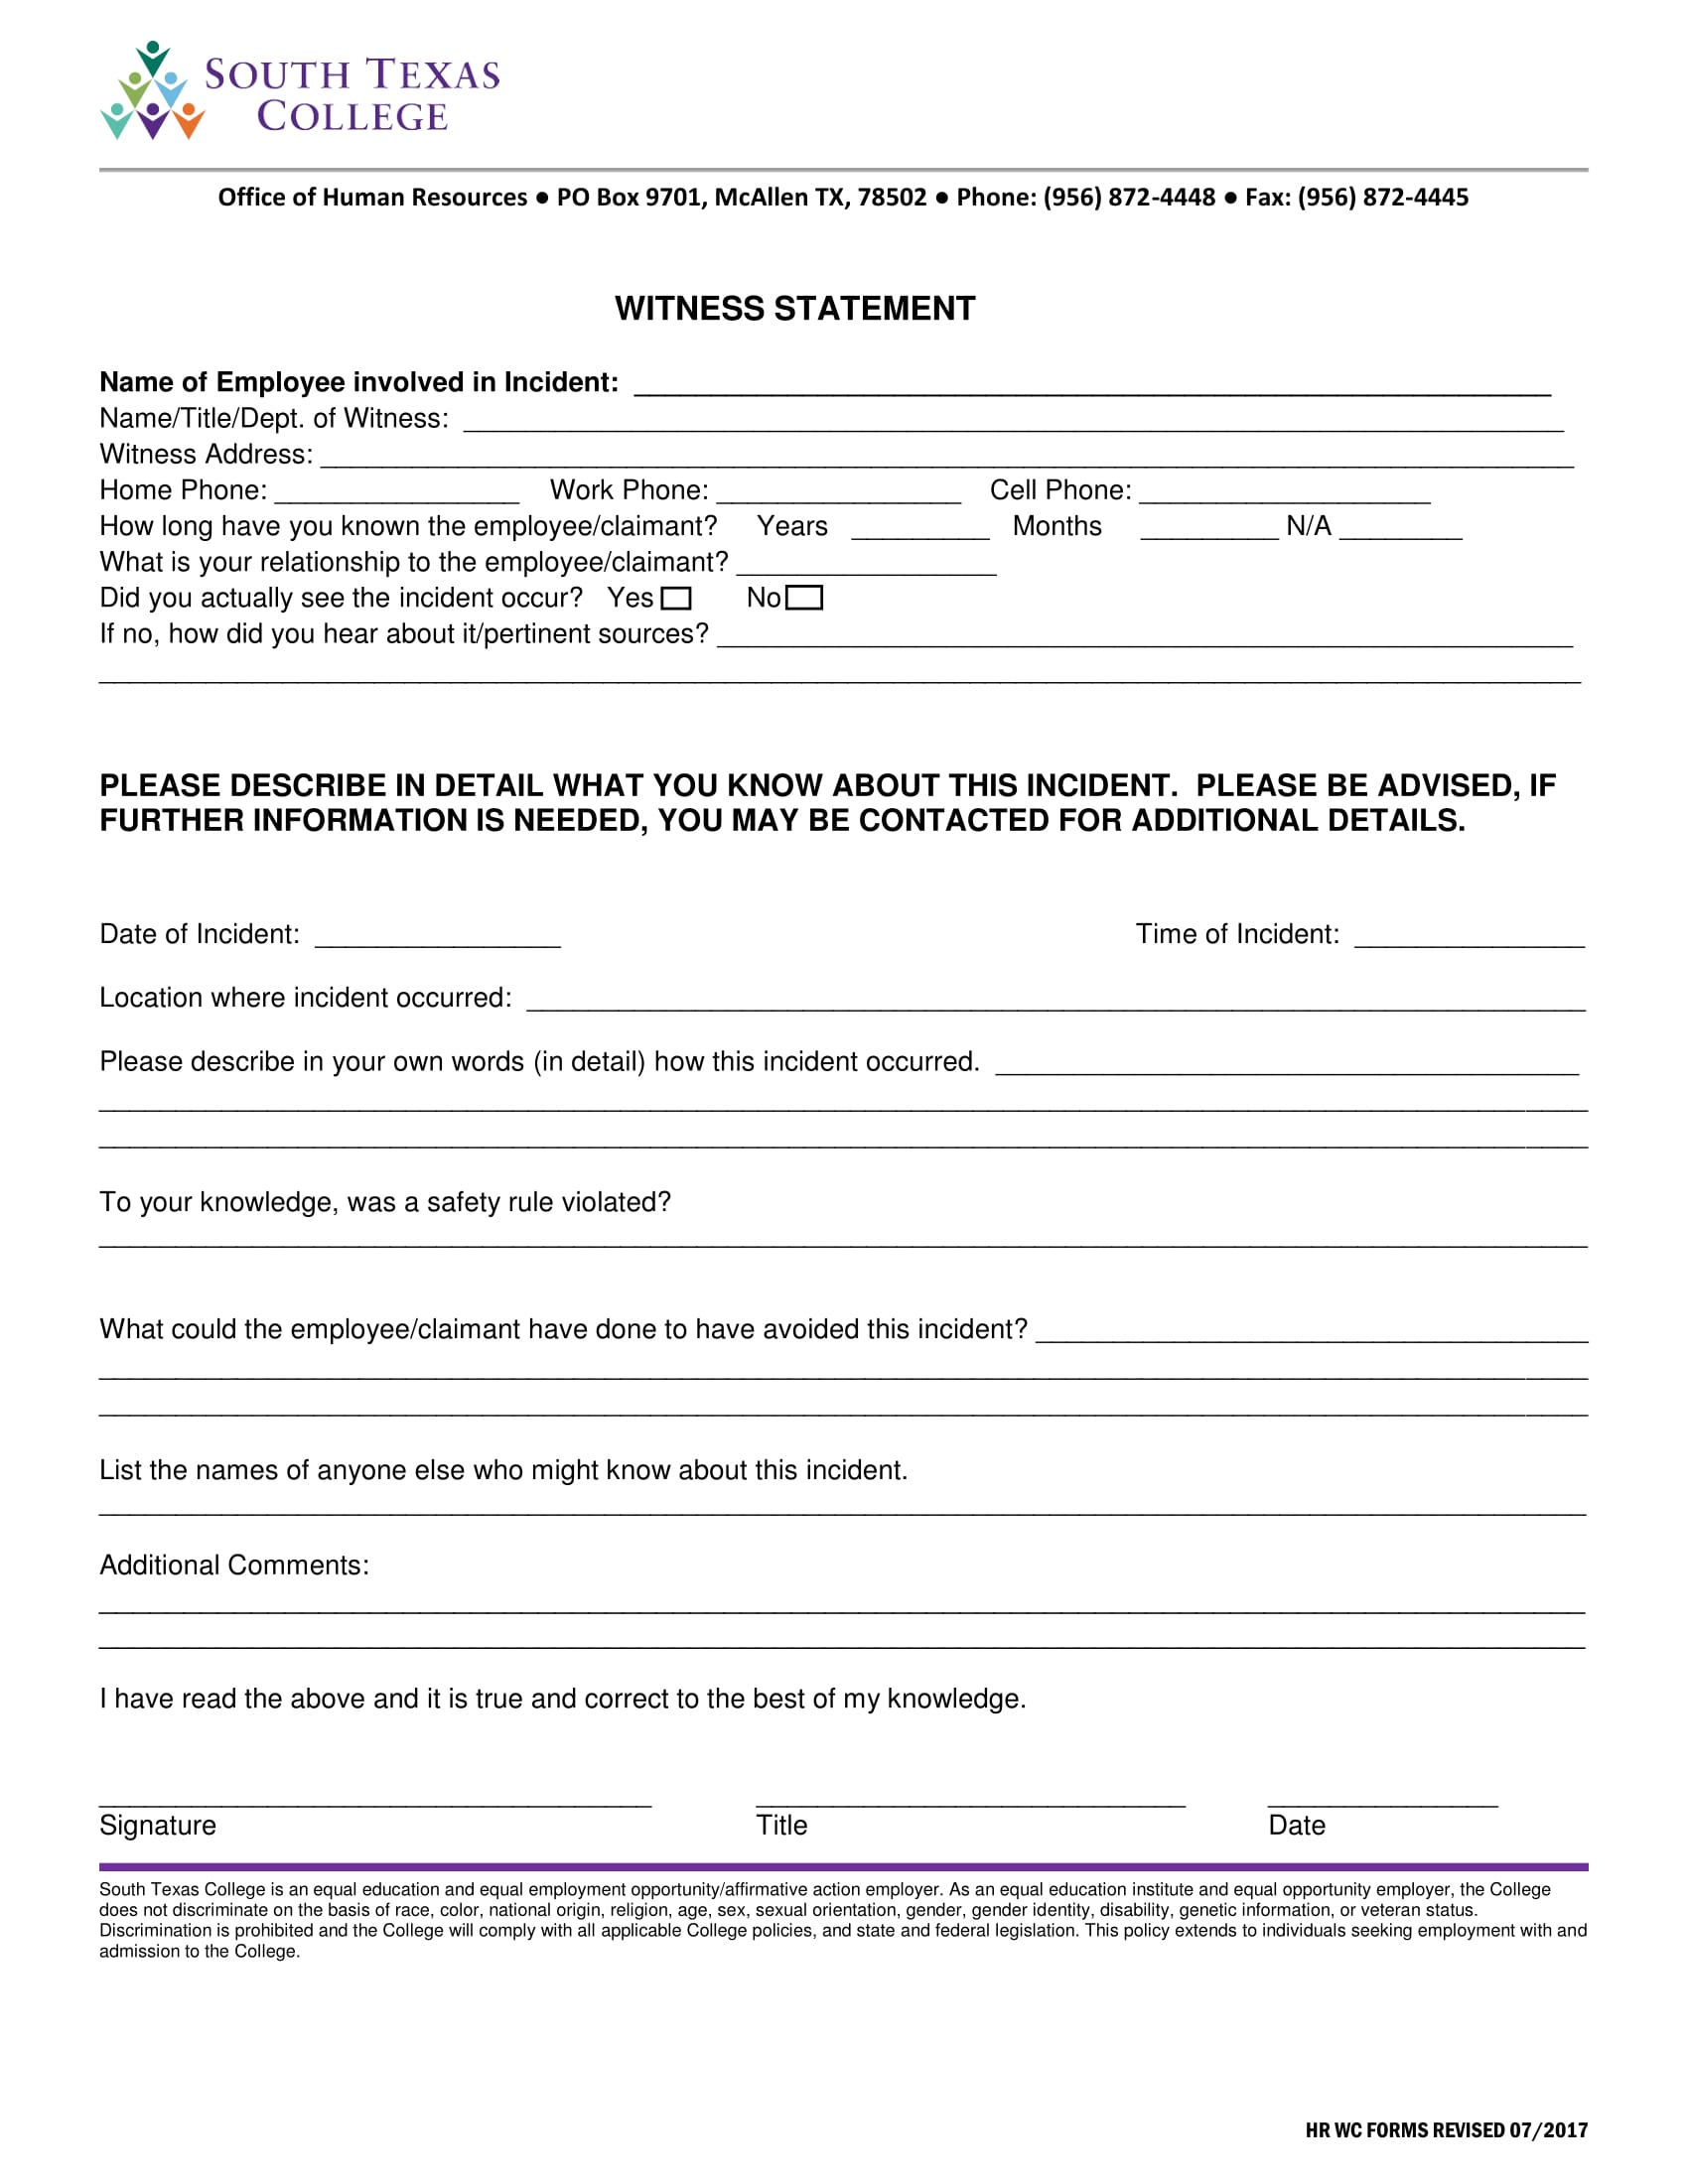 college employee witness statement form 1